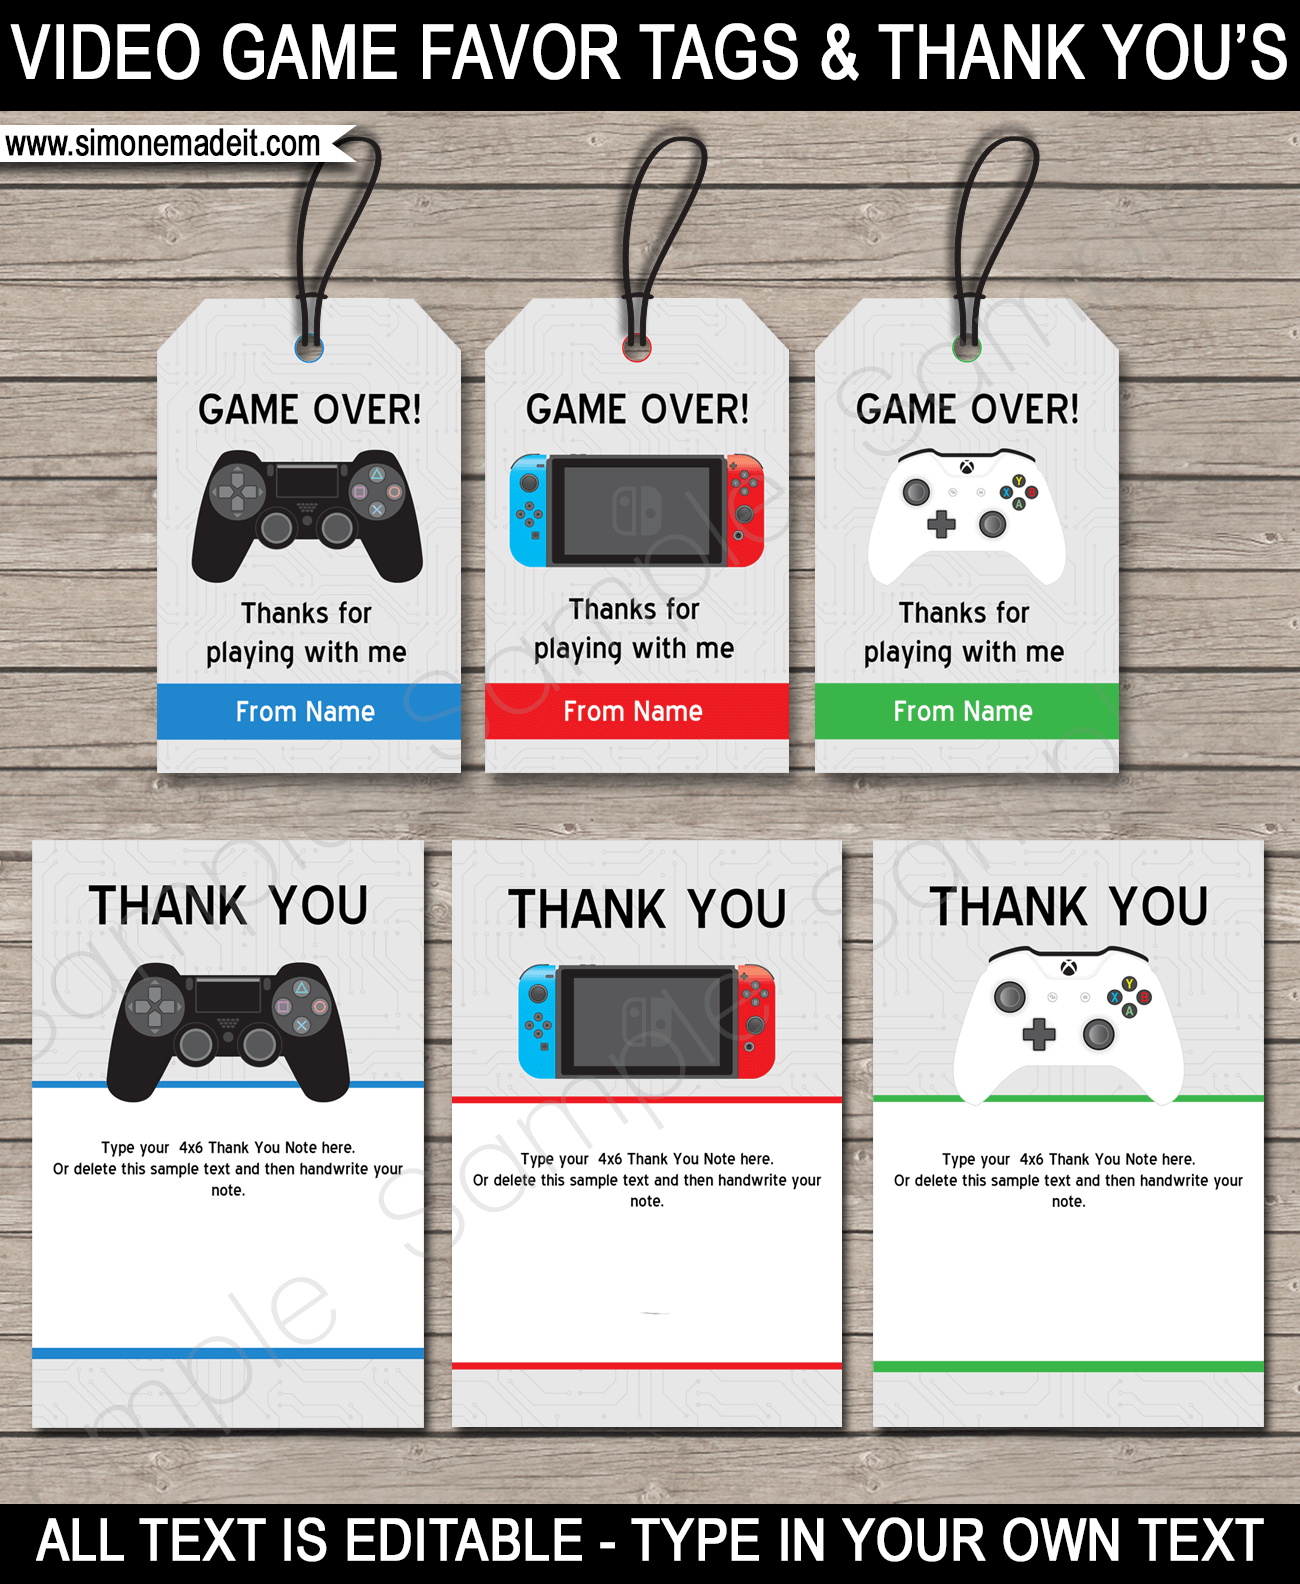 Video Game Birthday Party Theme Favor Tags & Thank You Notes - Playstation Party Invitation, Nintendo Switch Party Invitation & Xbox Party Invitation - Editable & Printable DIY Templates - Instant download via simonemadeit.com